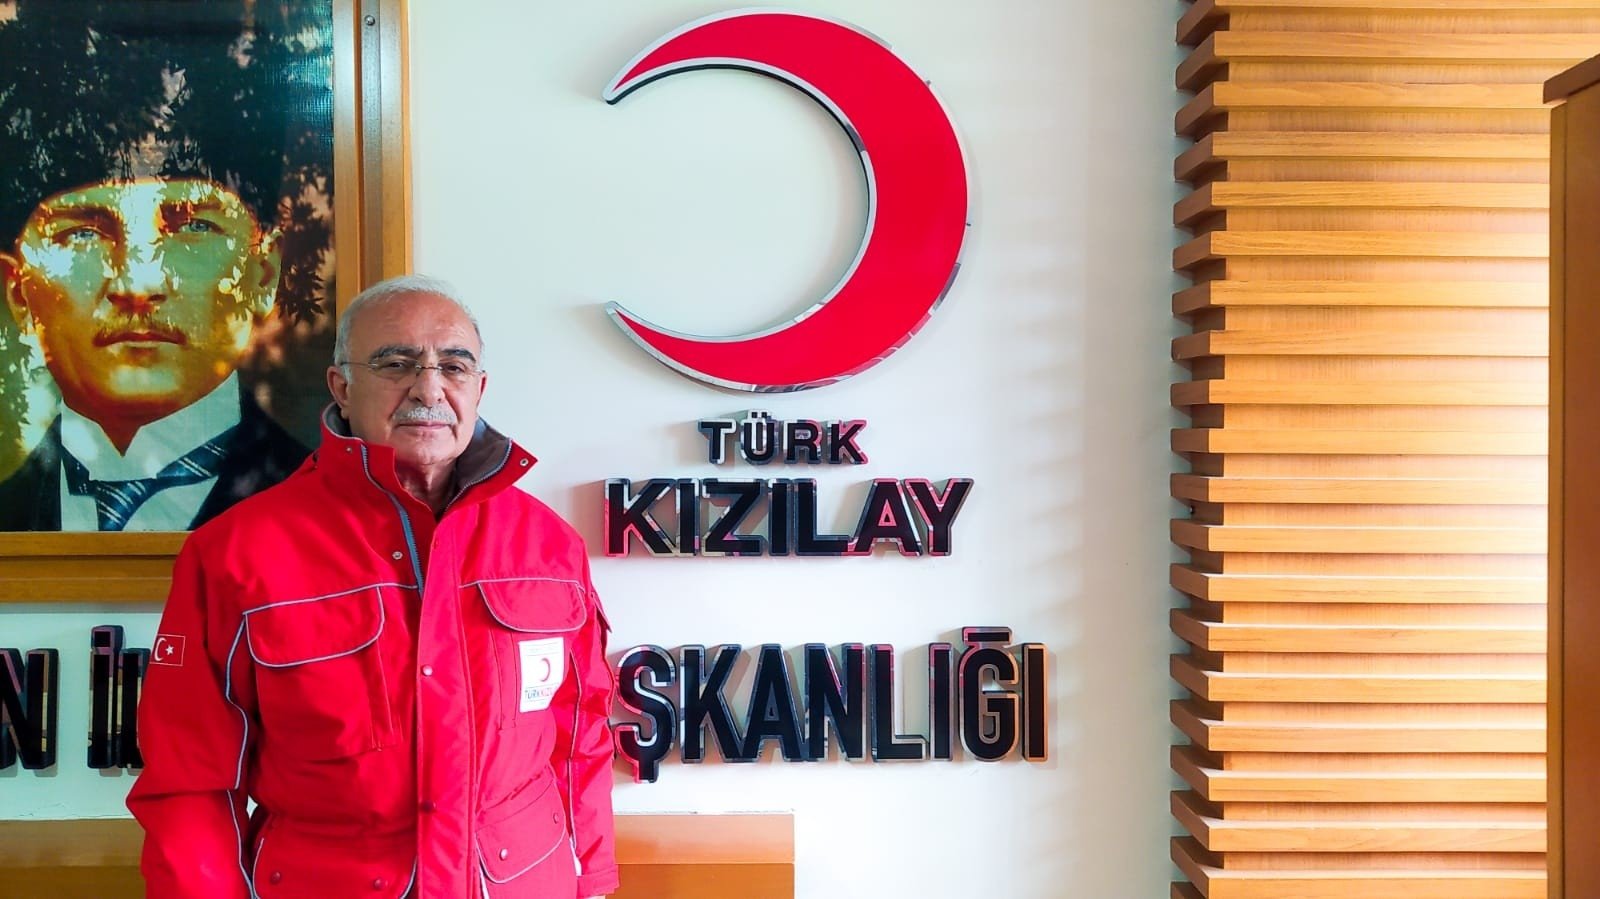 Mevlüt Günay, the head of Kızılay in Nazilli, poses for a photo at the Turkish Red Crescent branch in western Aydın province, Turkey, March 5, 2022. (IHA Photo)